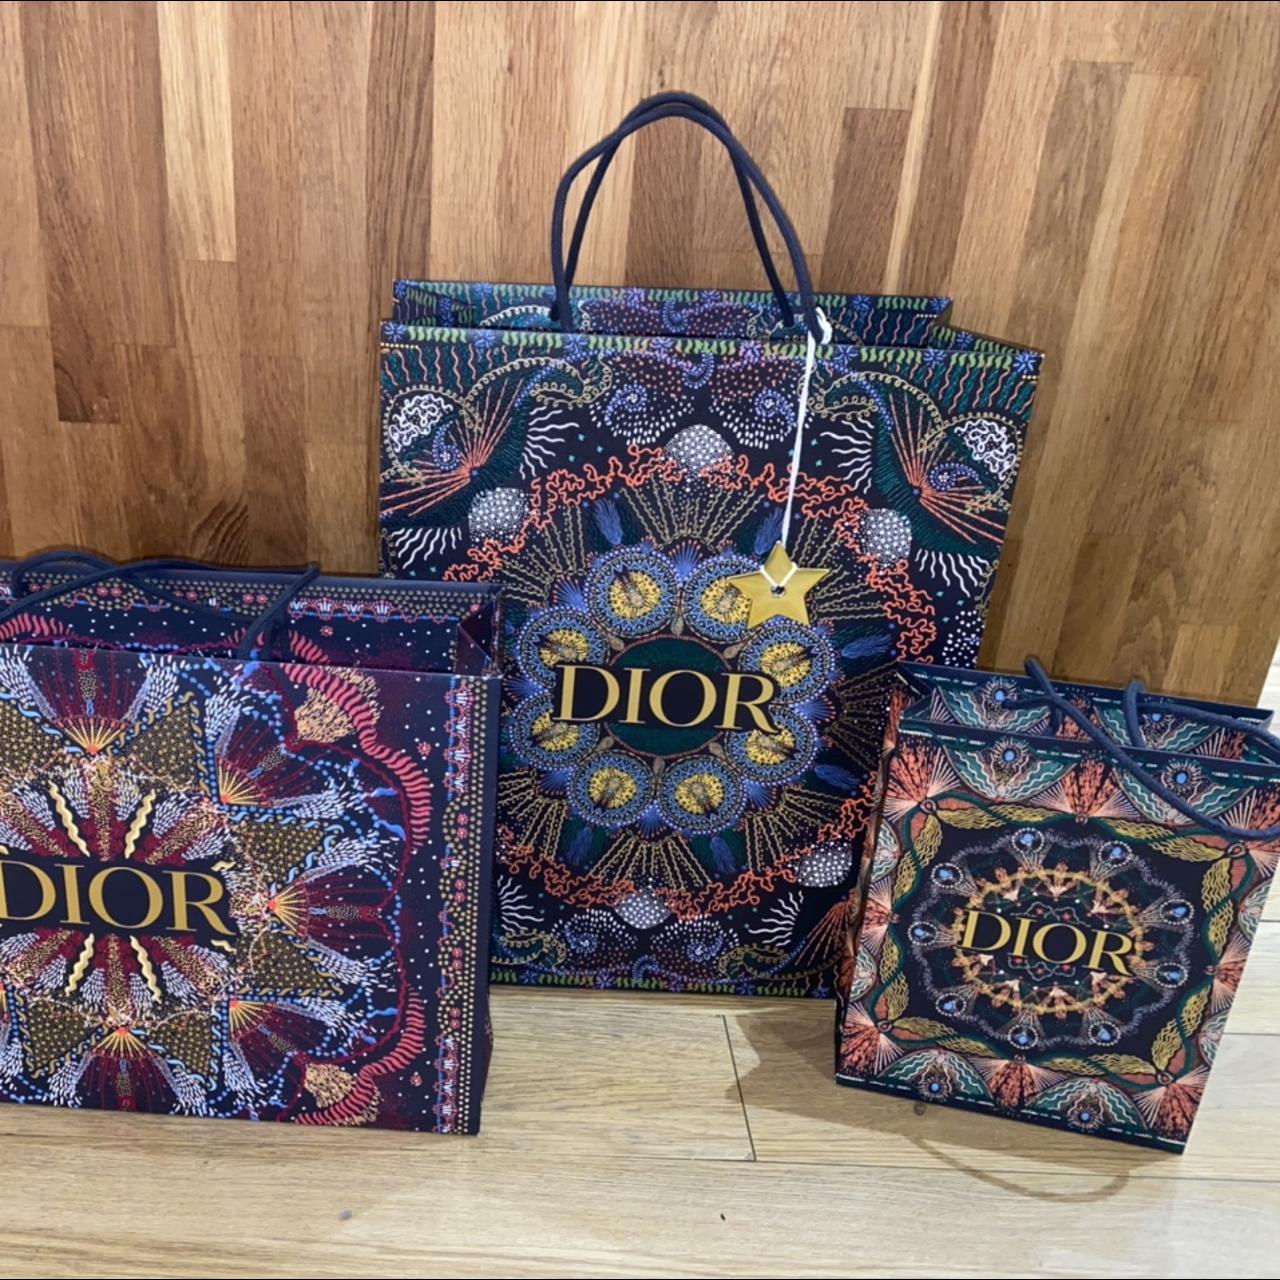 Dior  Bags  Dior Paper Shopping Bag With Ribbon And Gold Star Charm   Poshmark